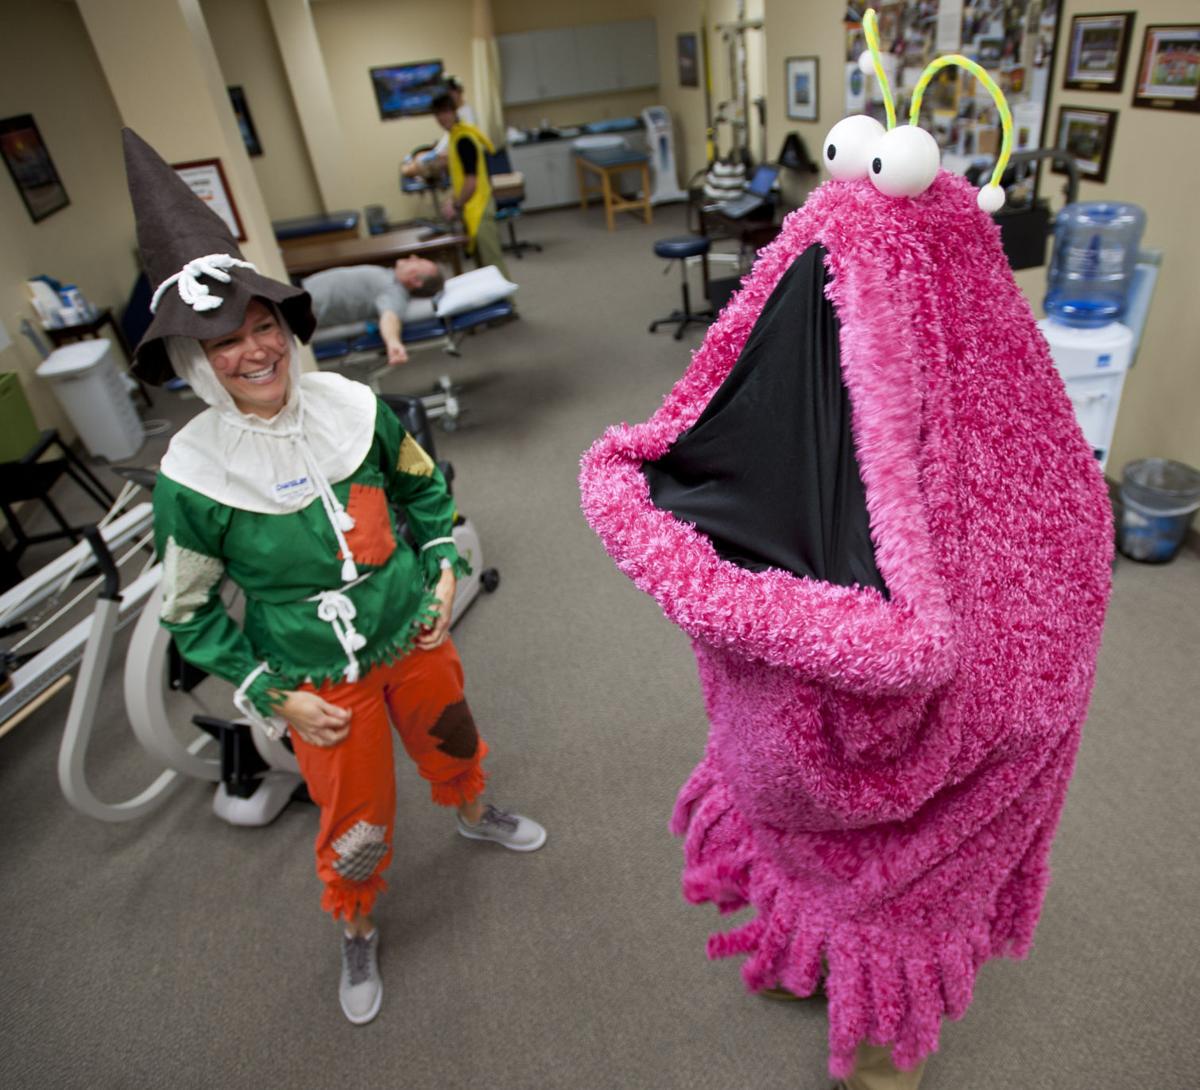 Trick or treatment: Physical therapy office gets in the Halloween ...